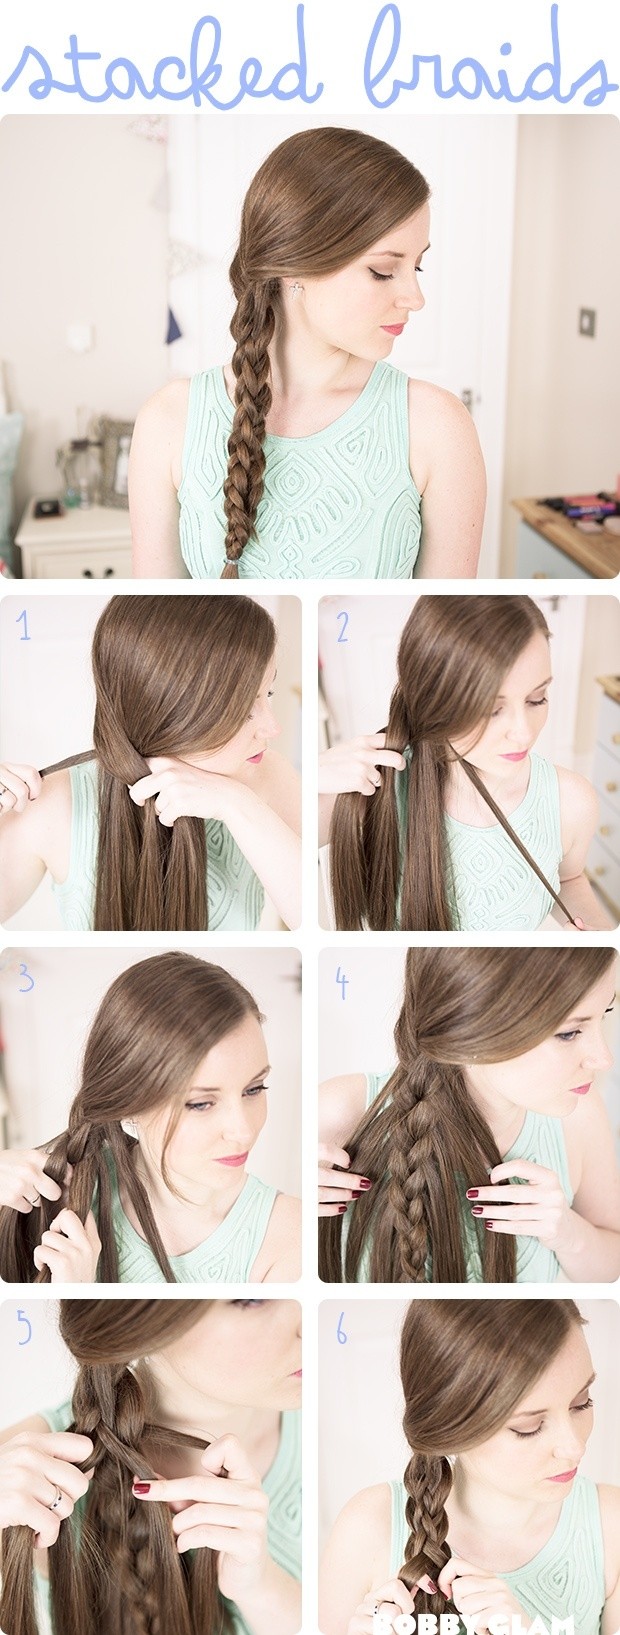 Stacked Braided Hairstyle Tutorial